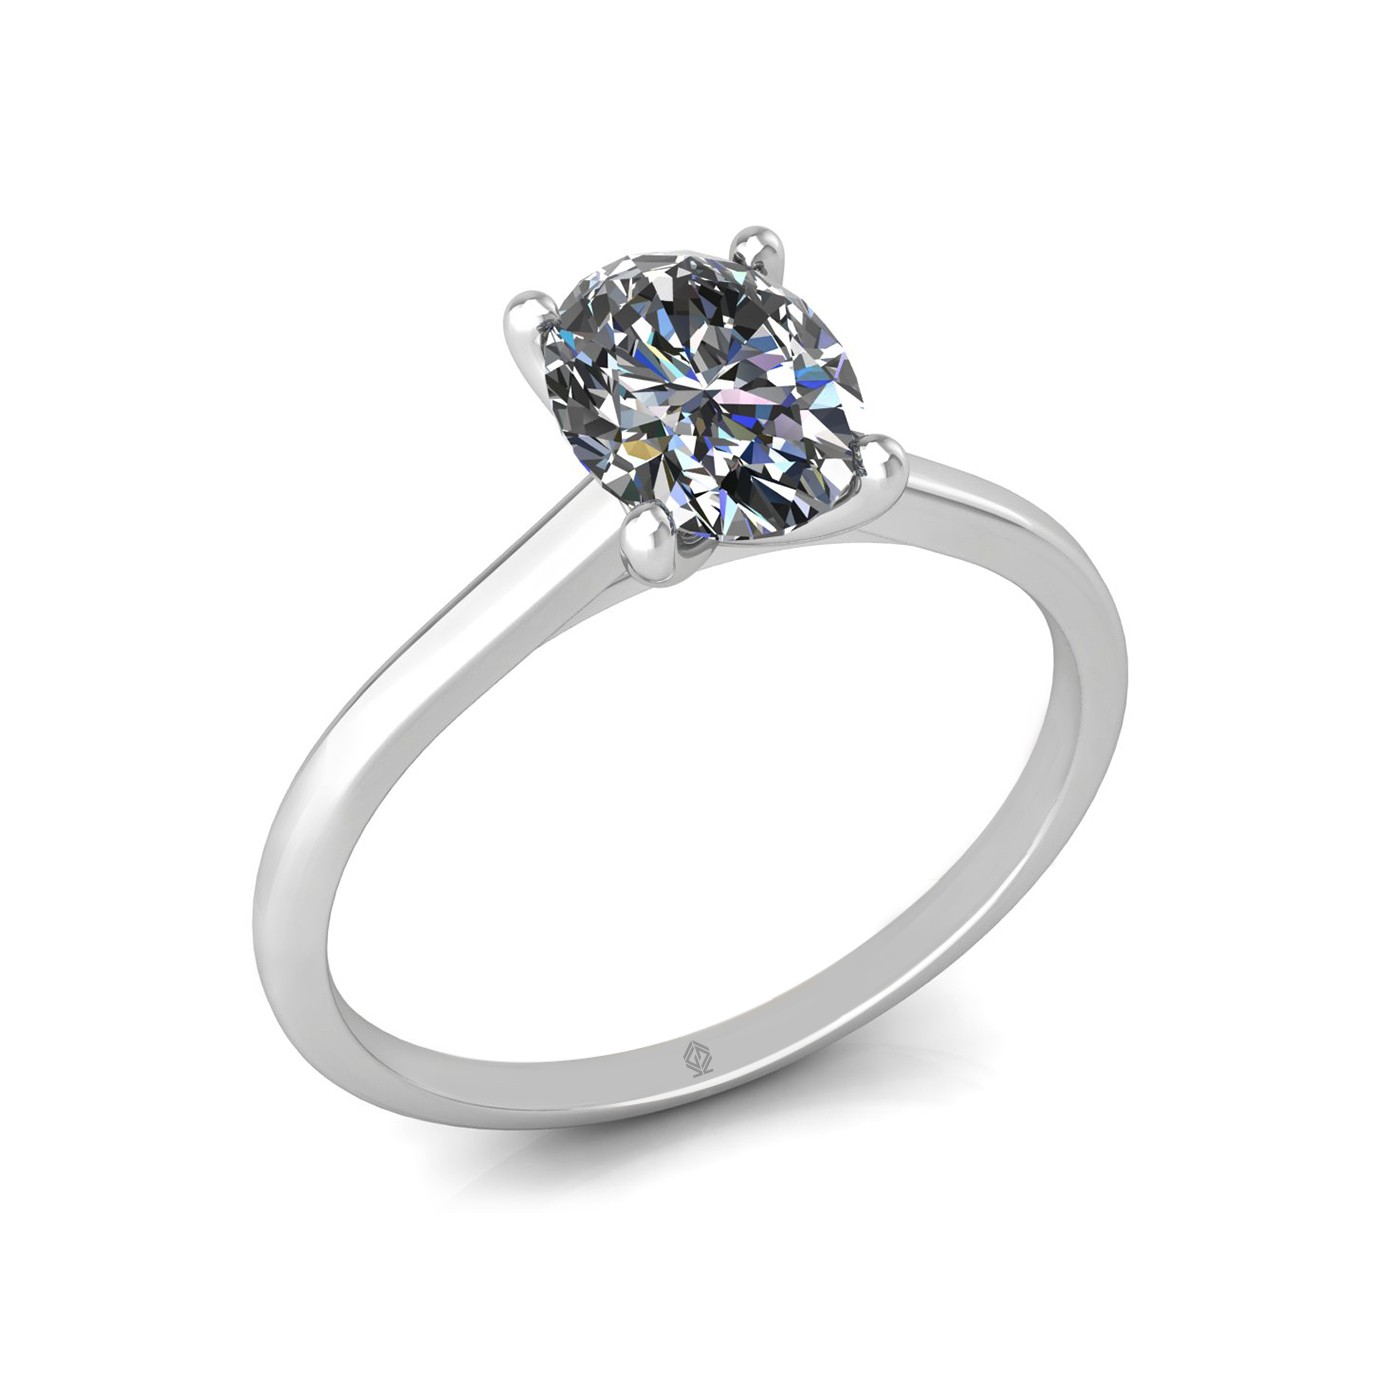 18k white gold  1,00 ct 4 prongs solitaire oval cut diamond engagement ring with whisper thin band